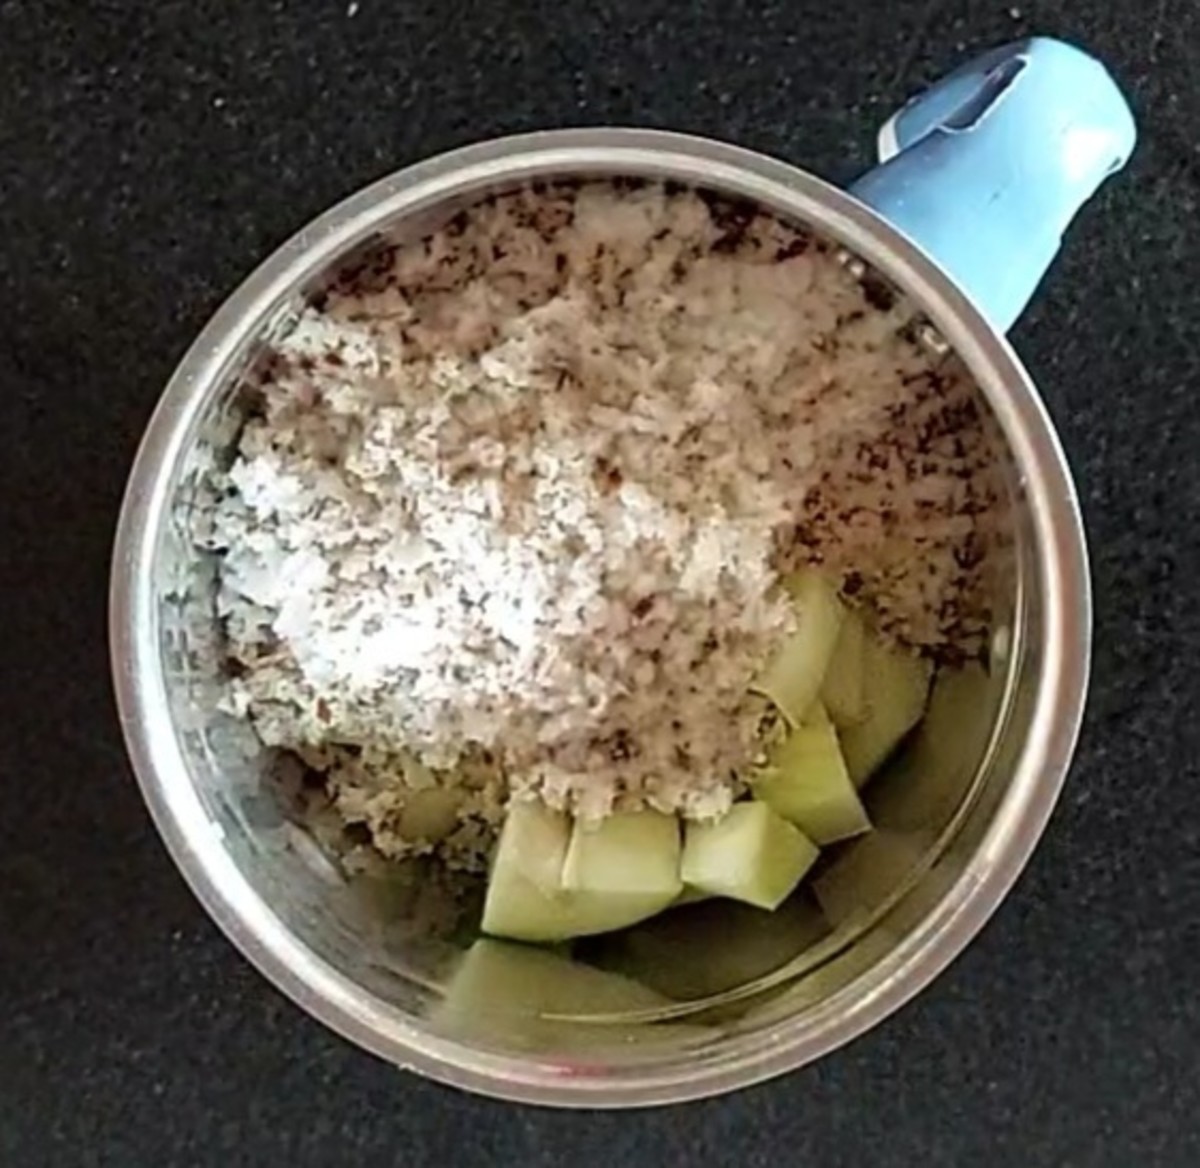 Transfer the cubed raw mango into a mixer jar and add 1 cup grated fresh coconut.